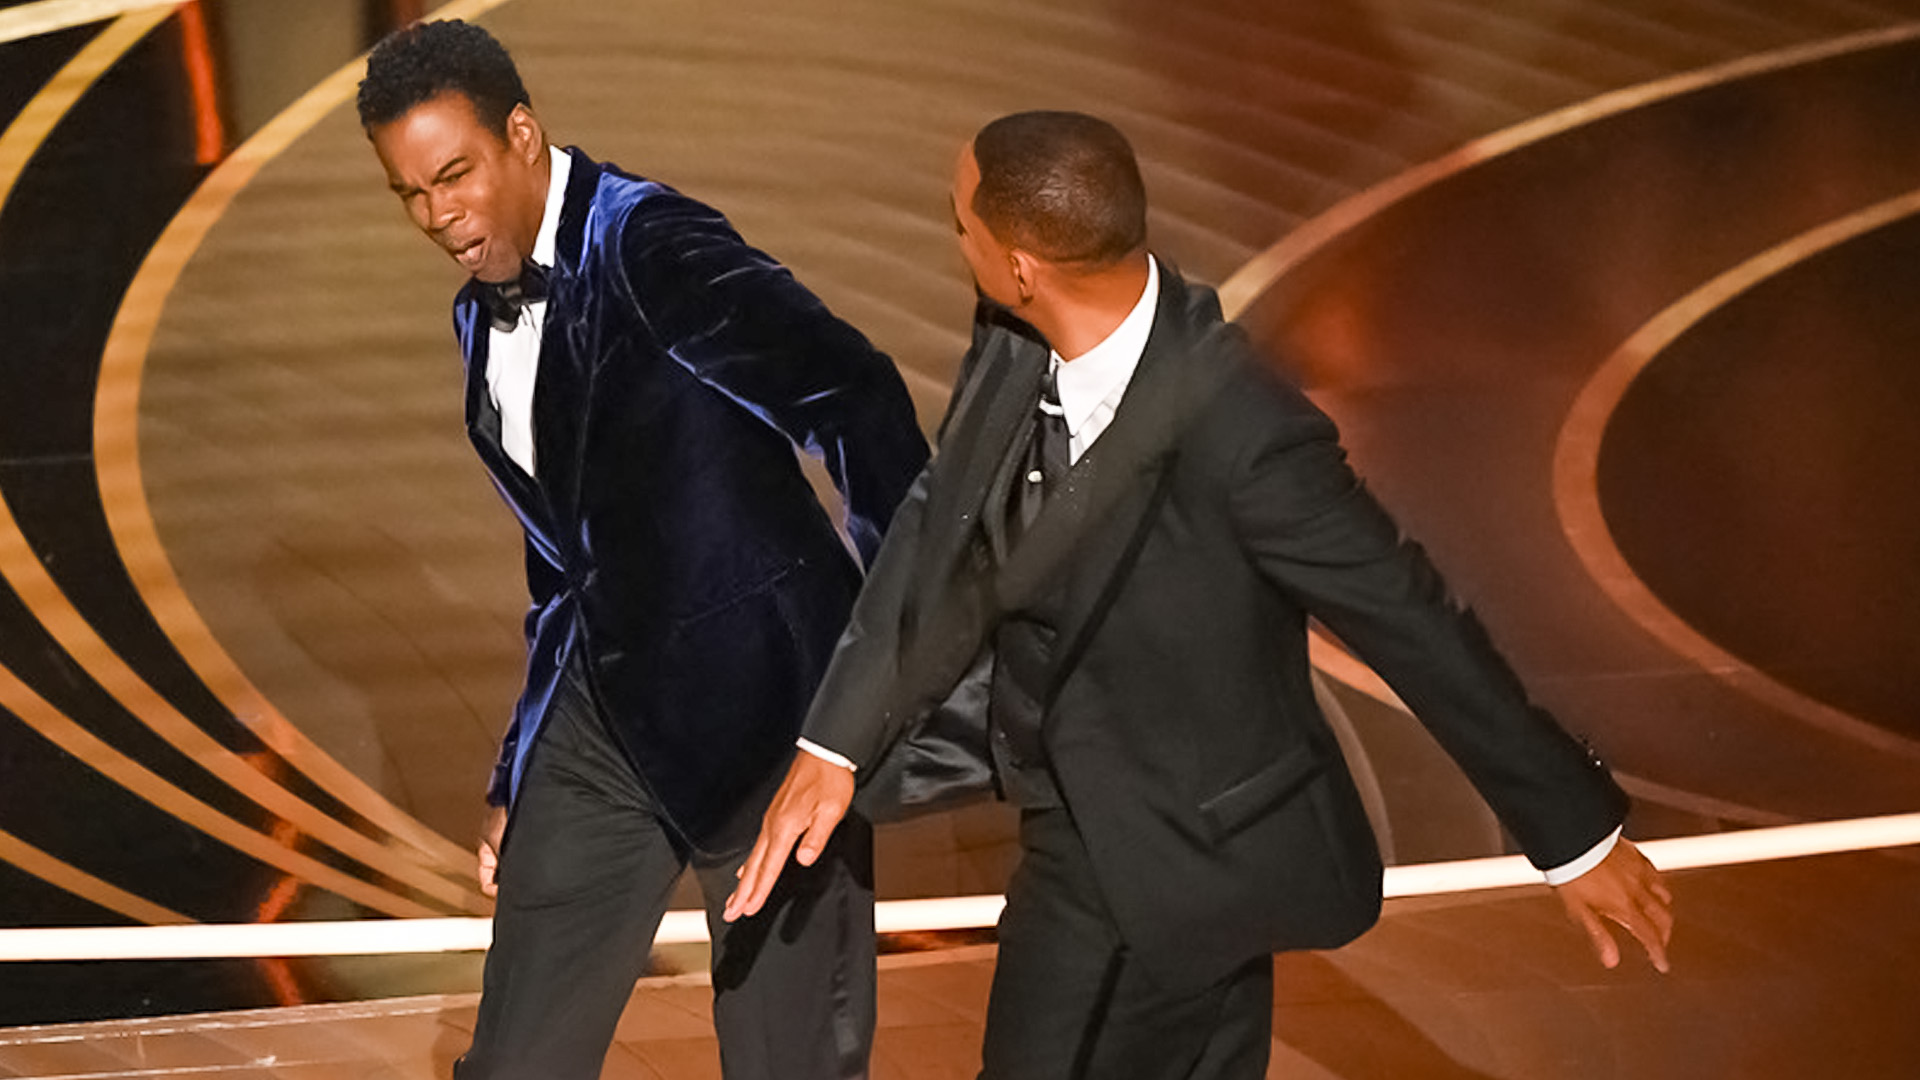 Will Smith resigns from the film academy after Chris Rock slap